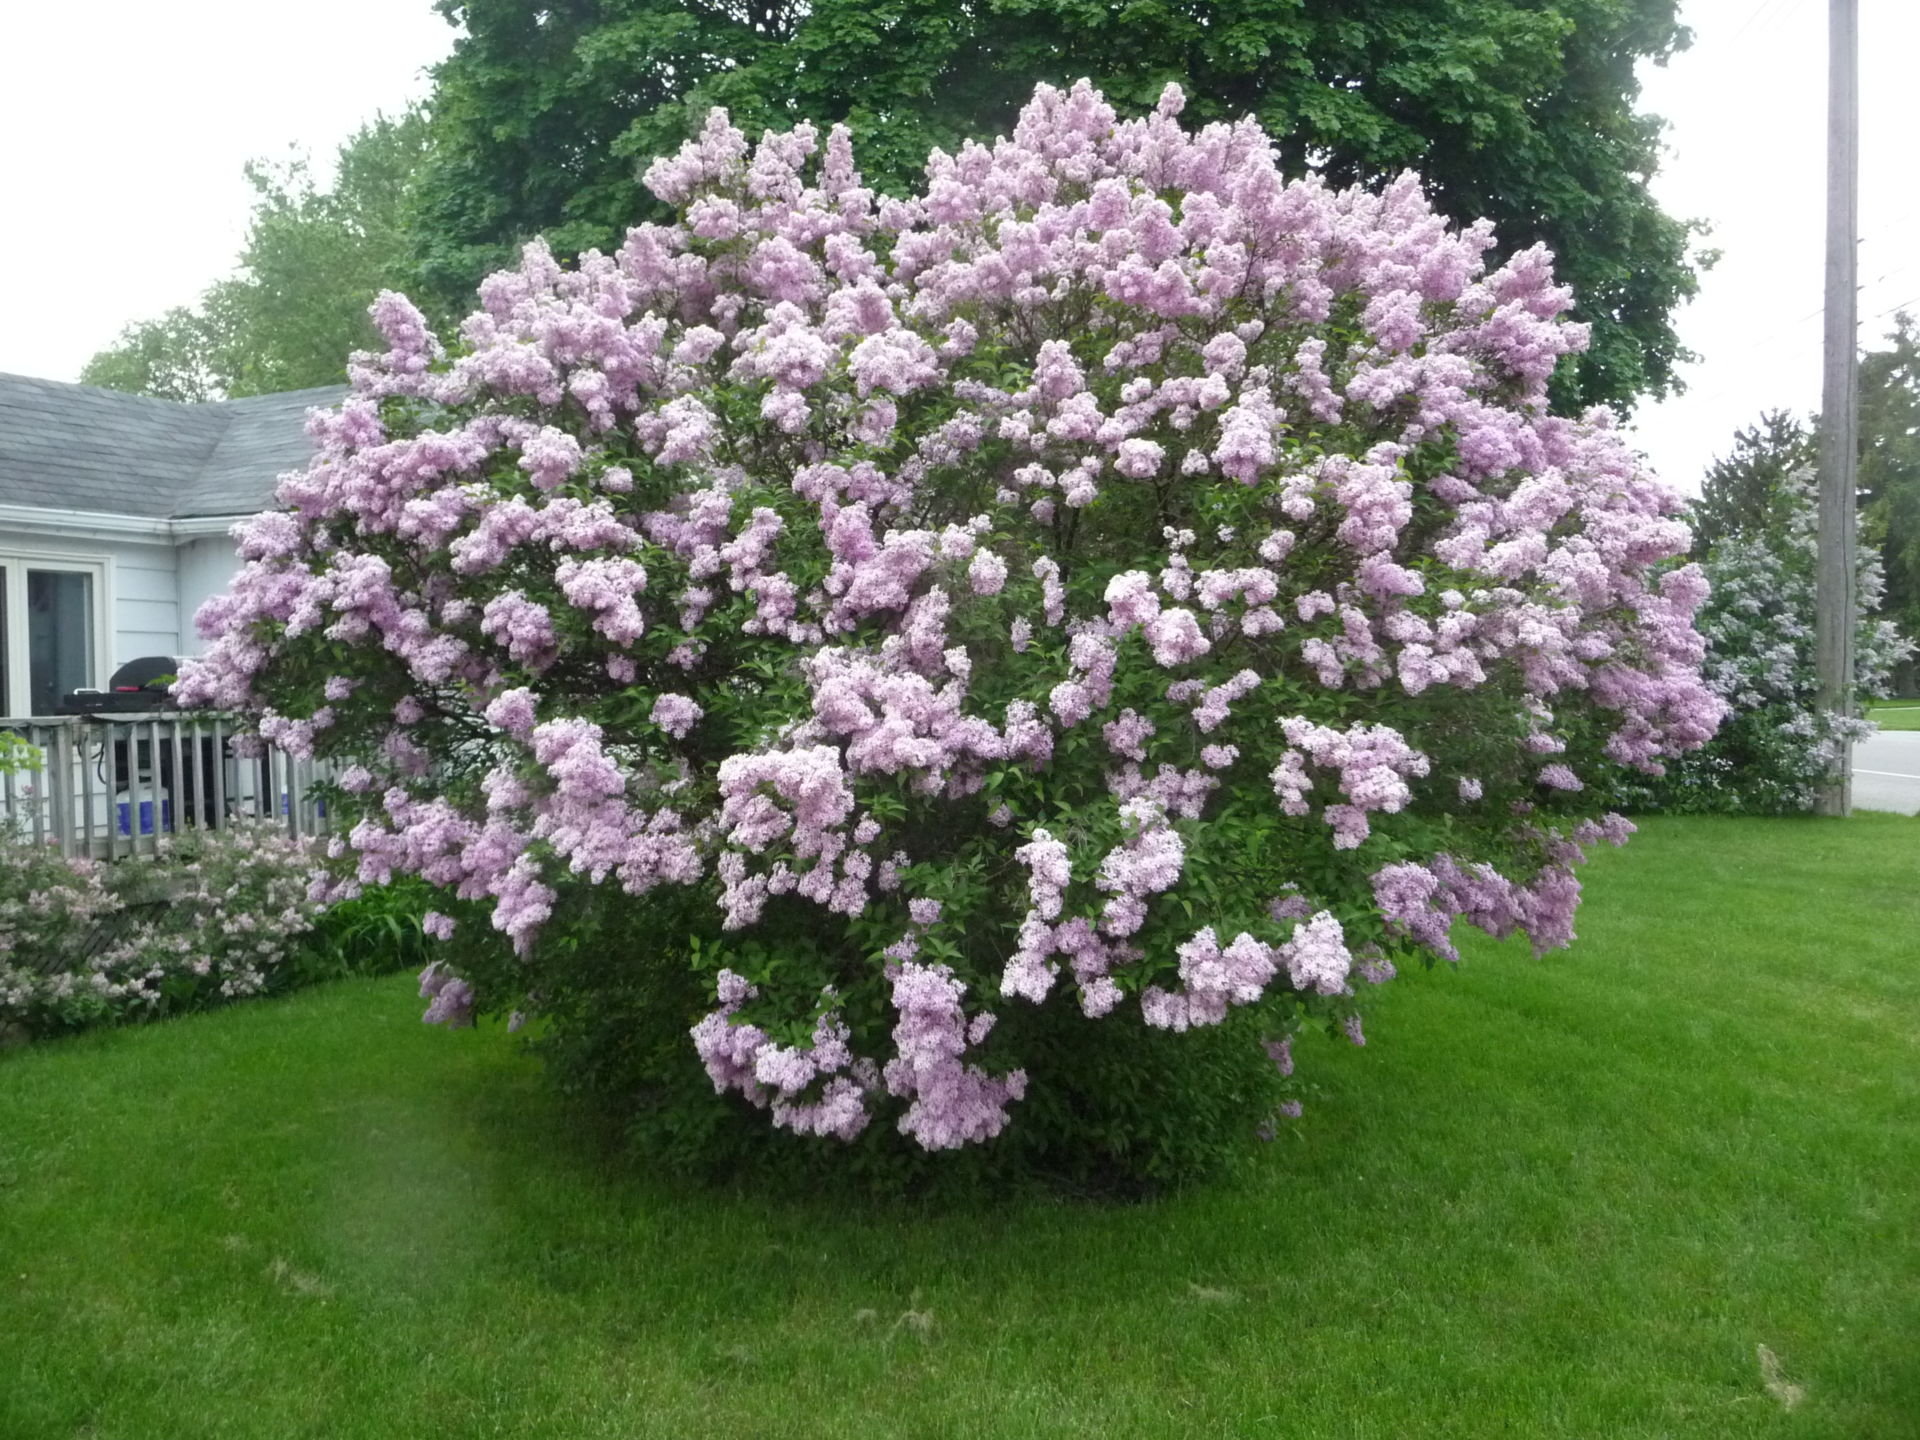 Reblooming Lilac Tree / Or, you can pair this reblooming lilac with